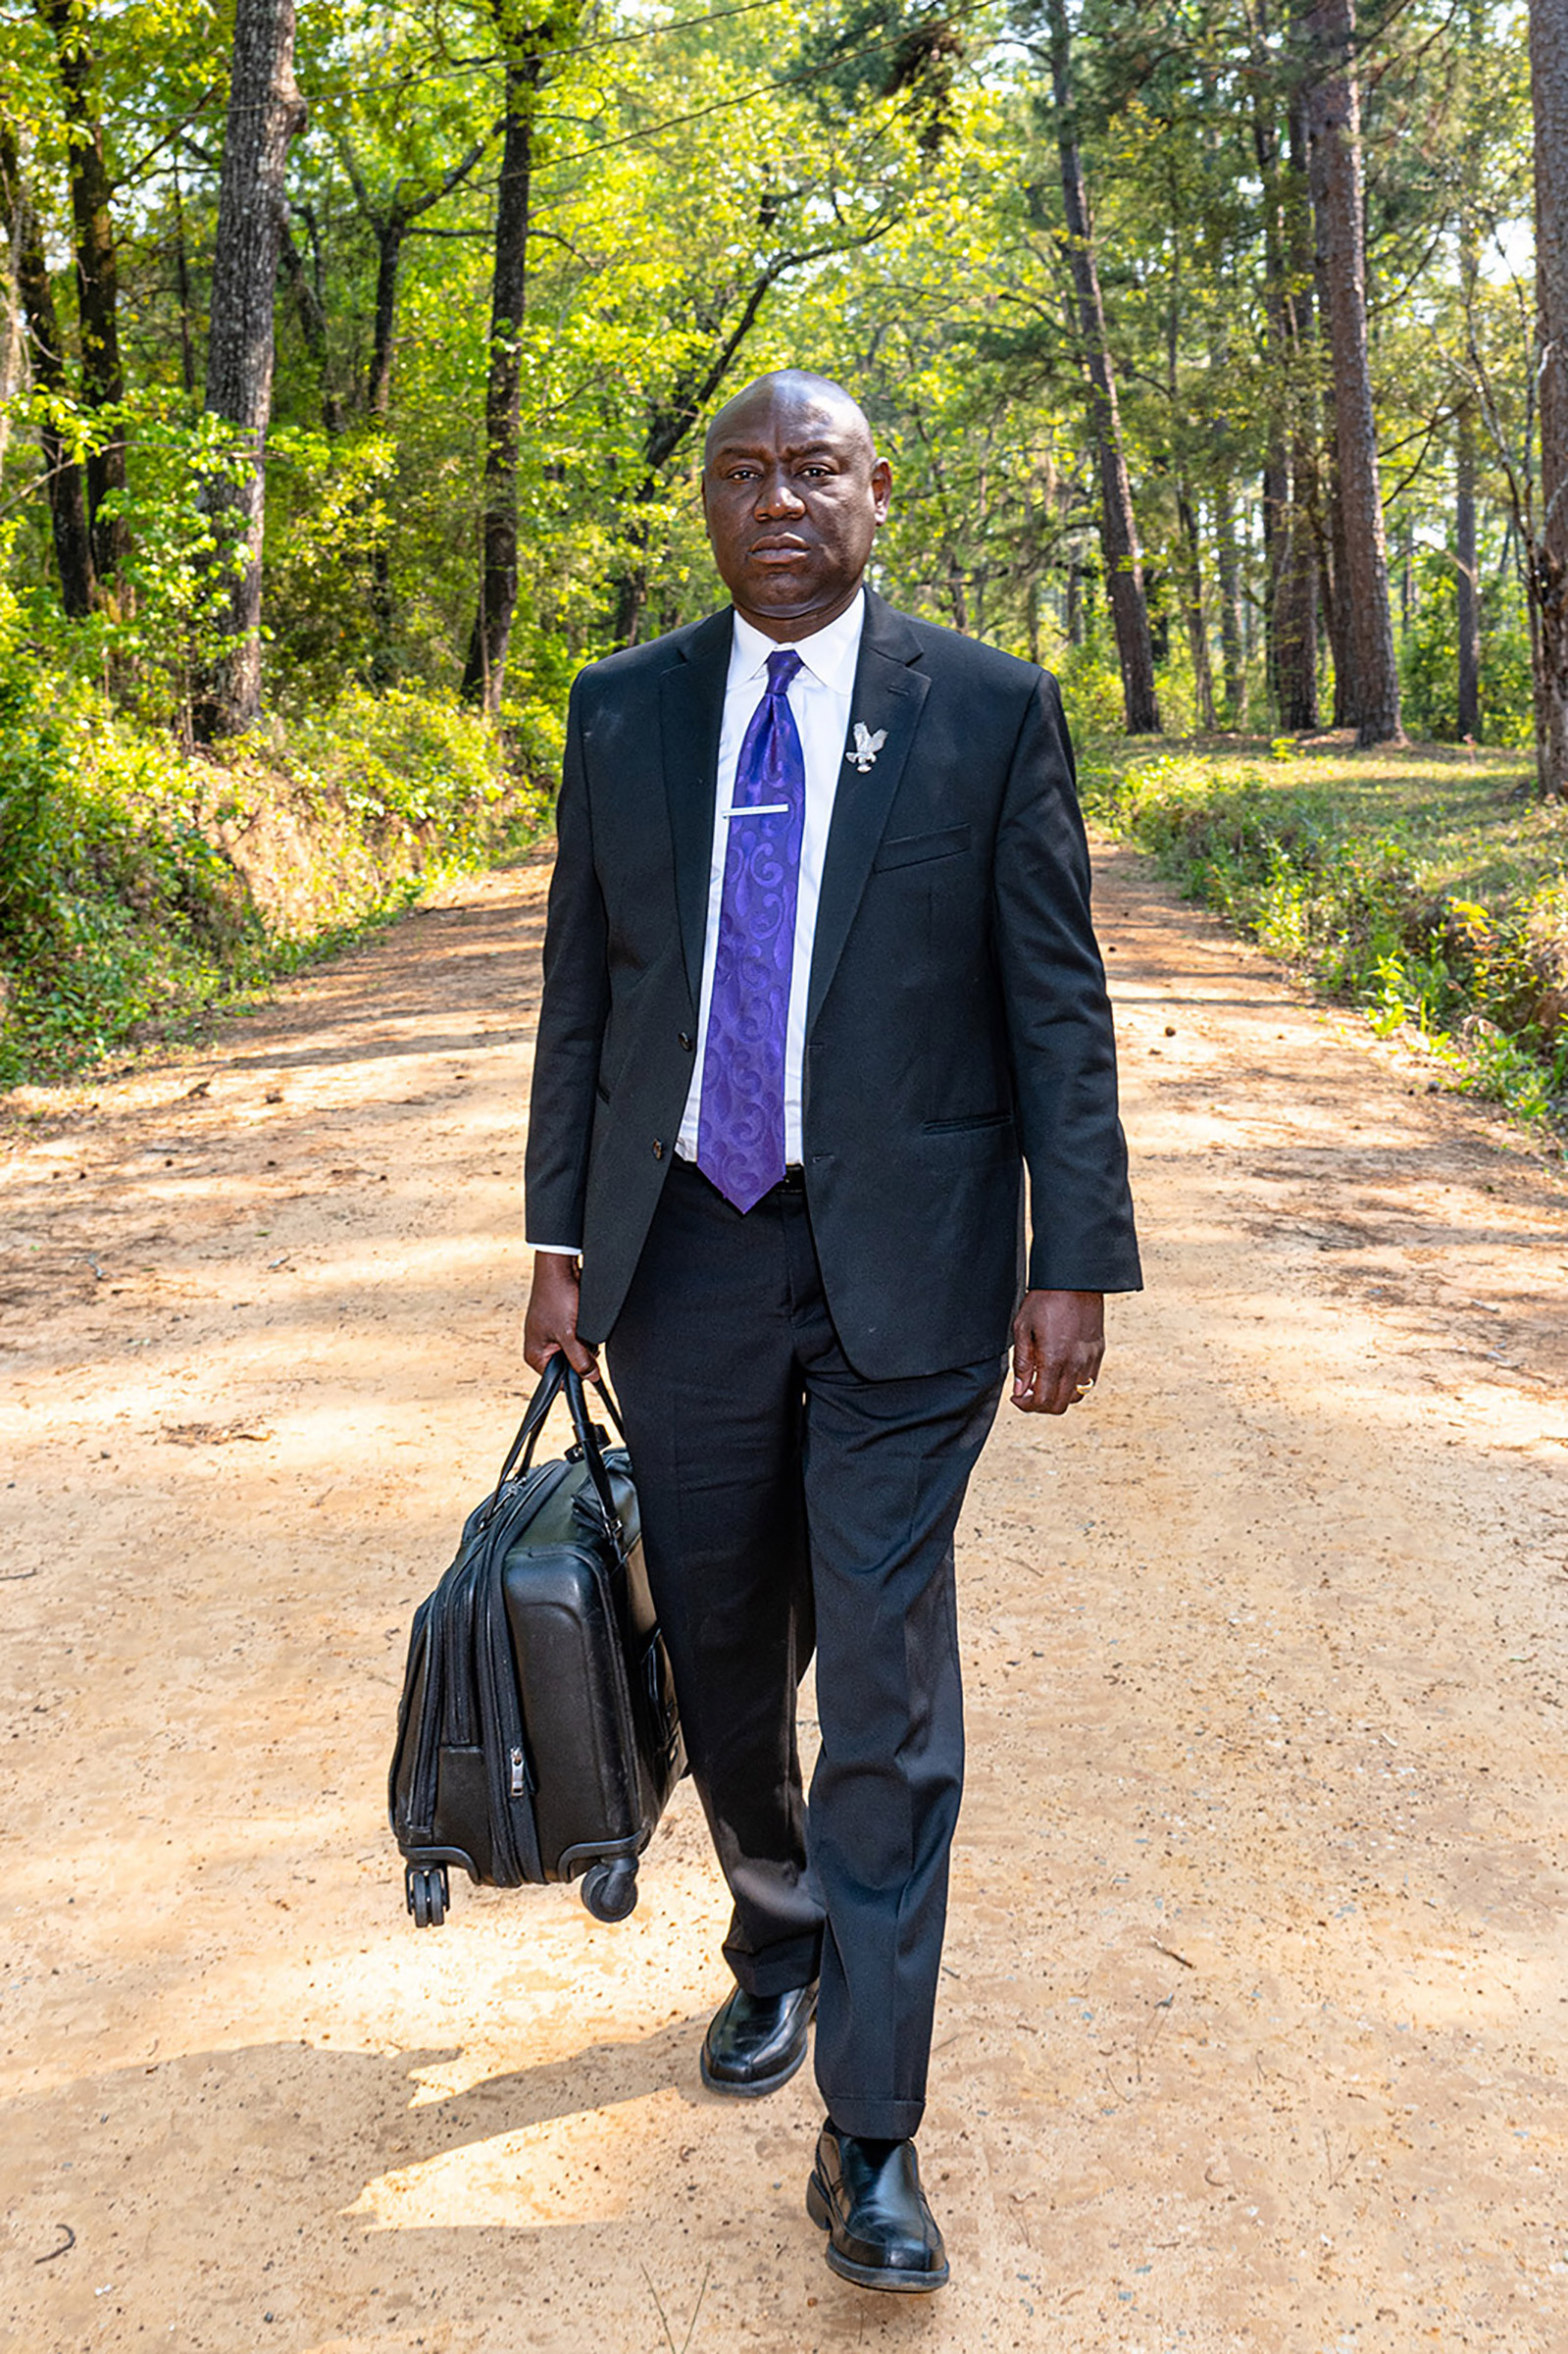 Crump on his way to visit a client in Tallahassee, Fla., on April 3.